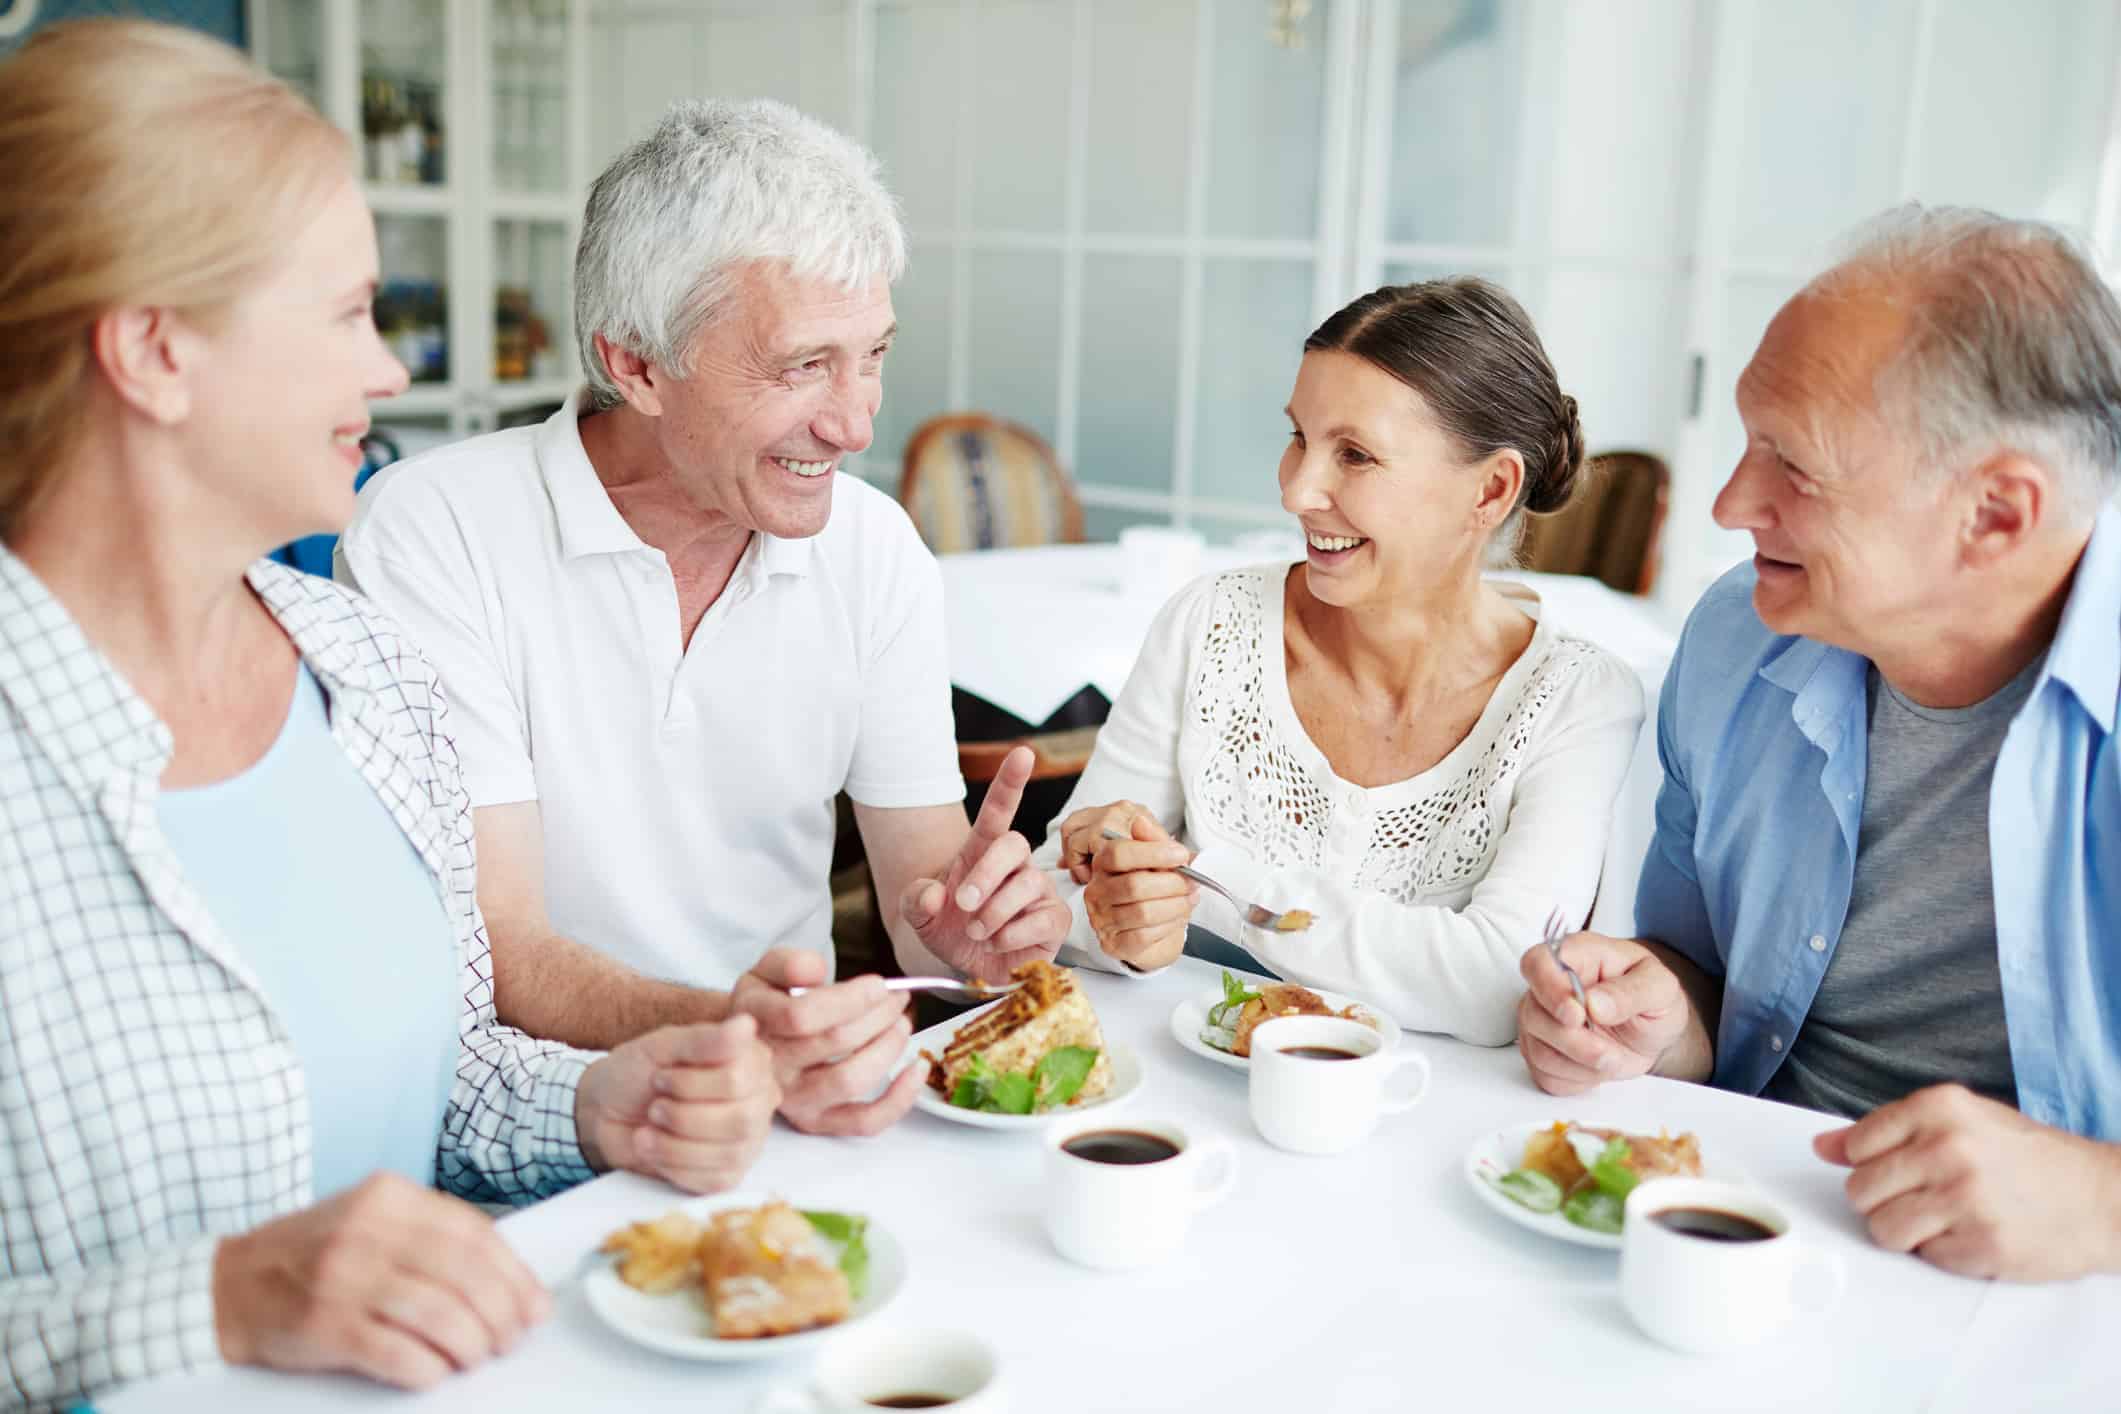 Treating your hearing loss helps you be more able to enjoy conversation over dessert with friends.